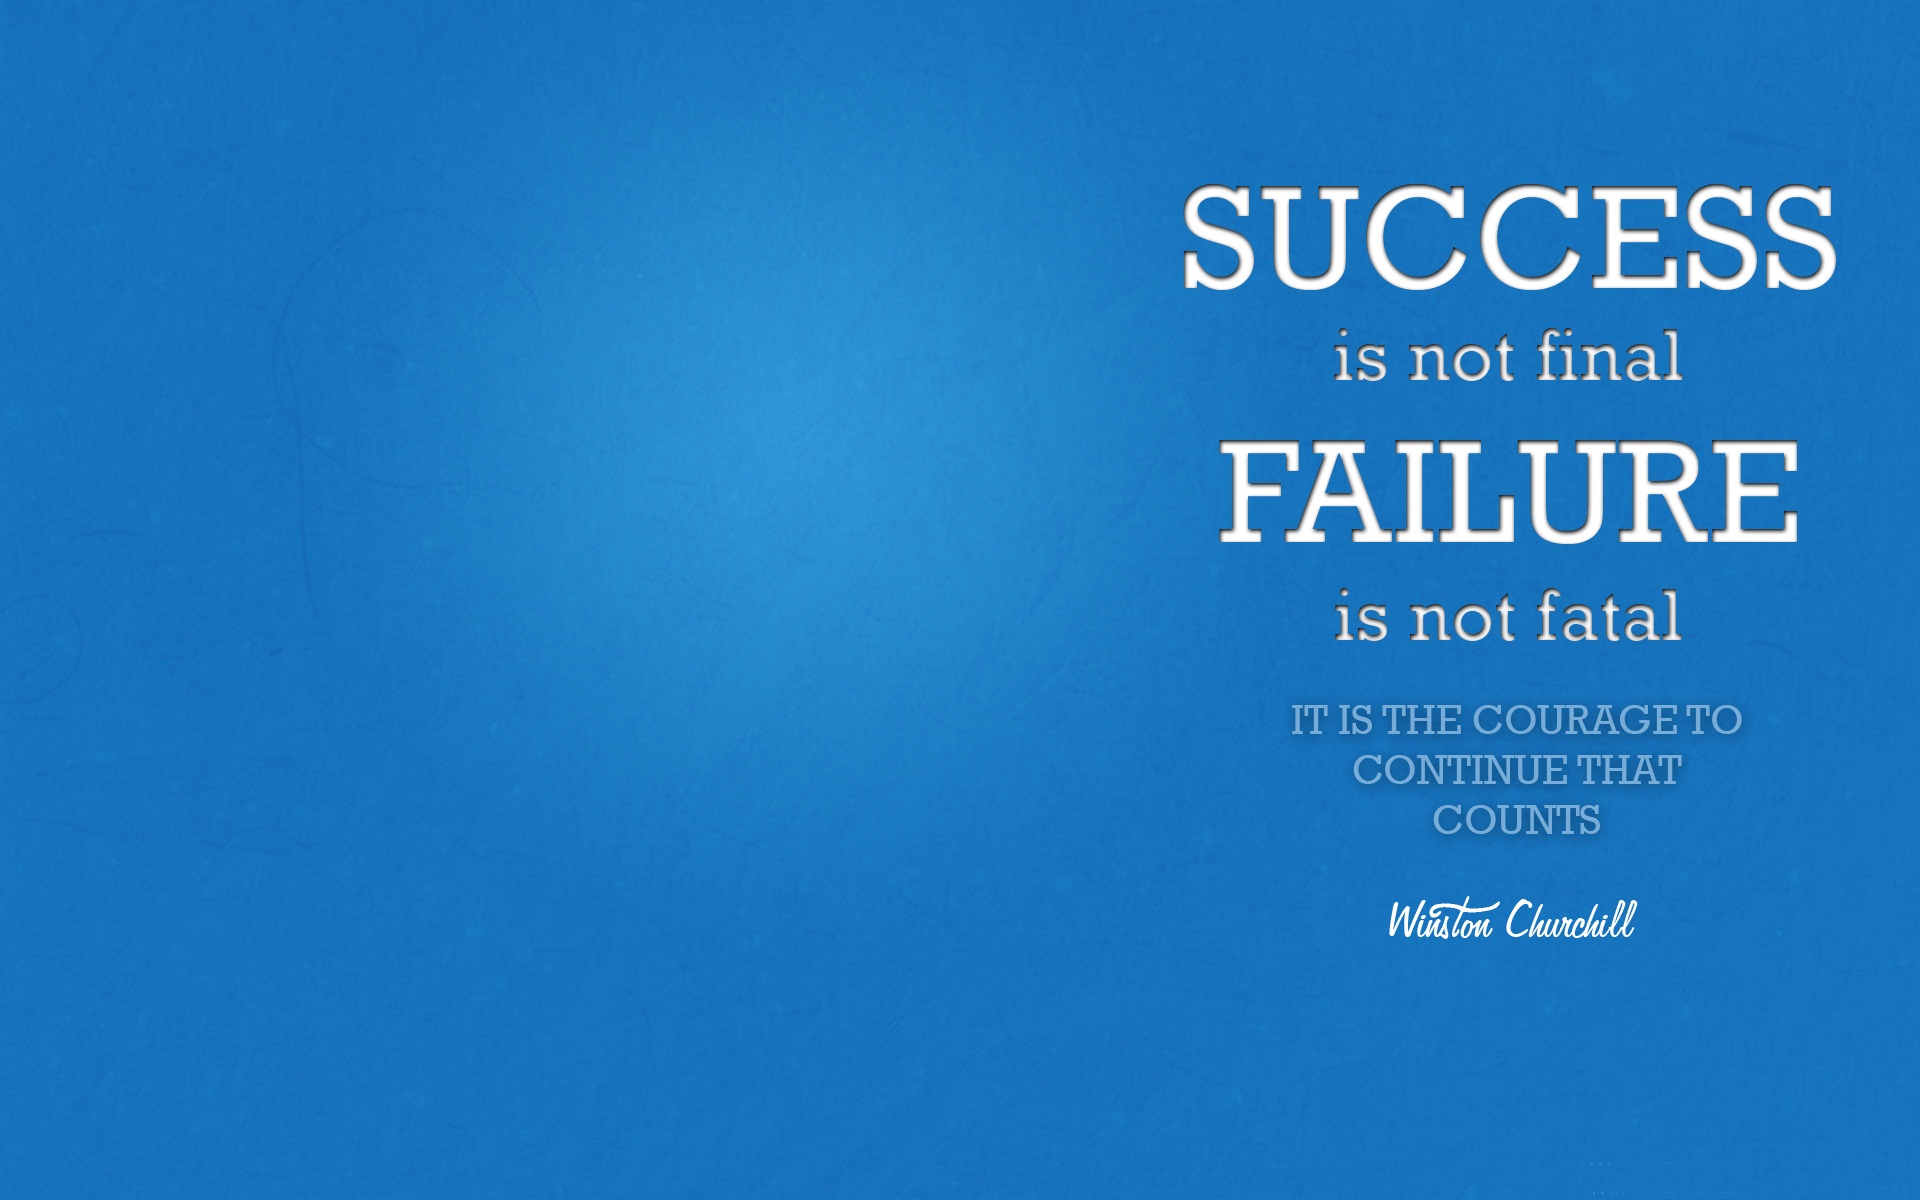 Success Quote Wallpaper By Winston Churchill: Success is not final